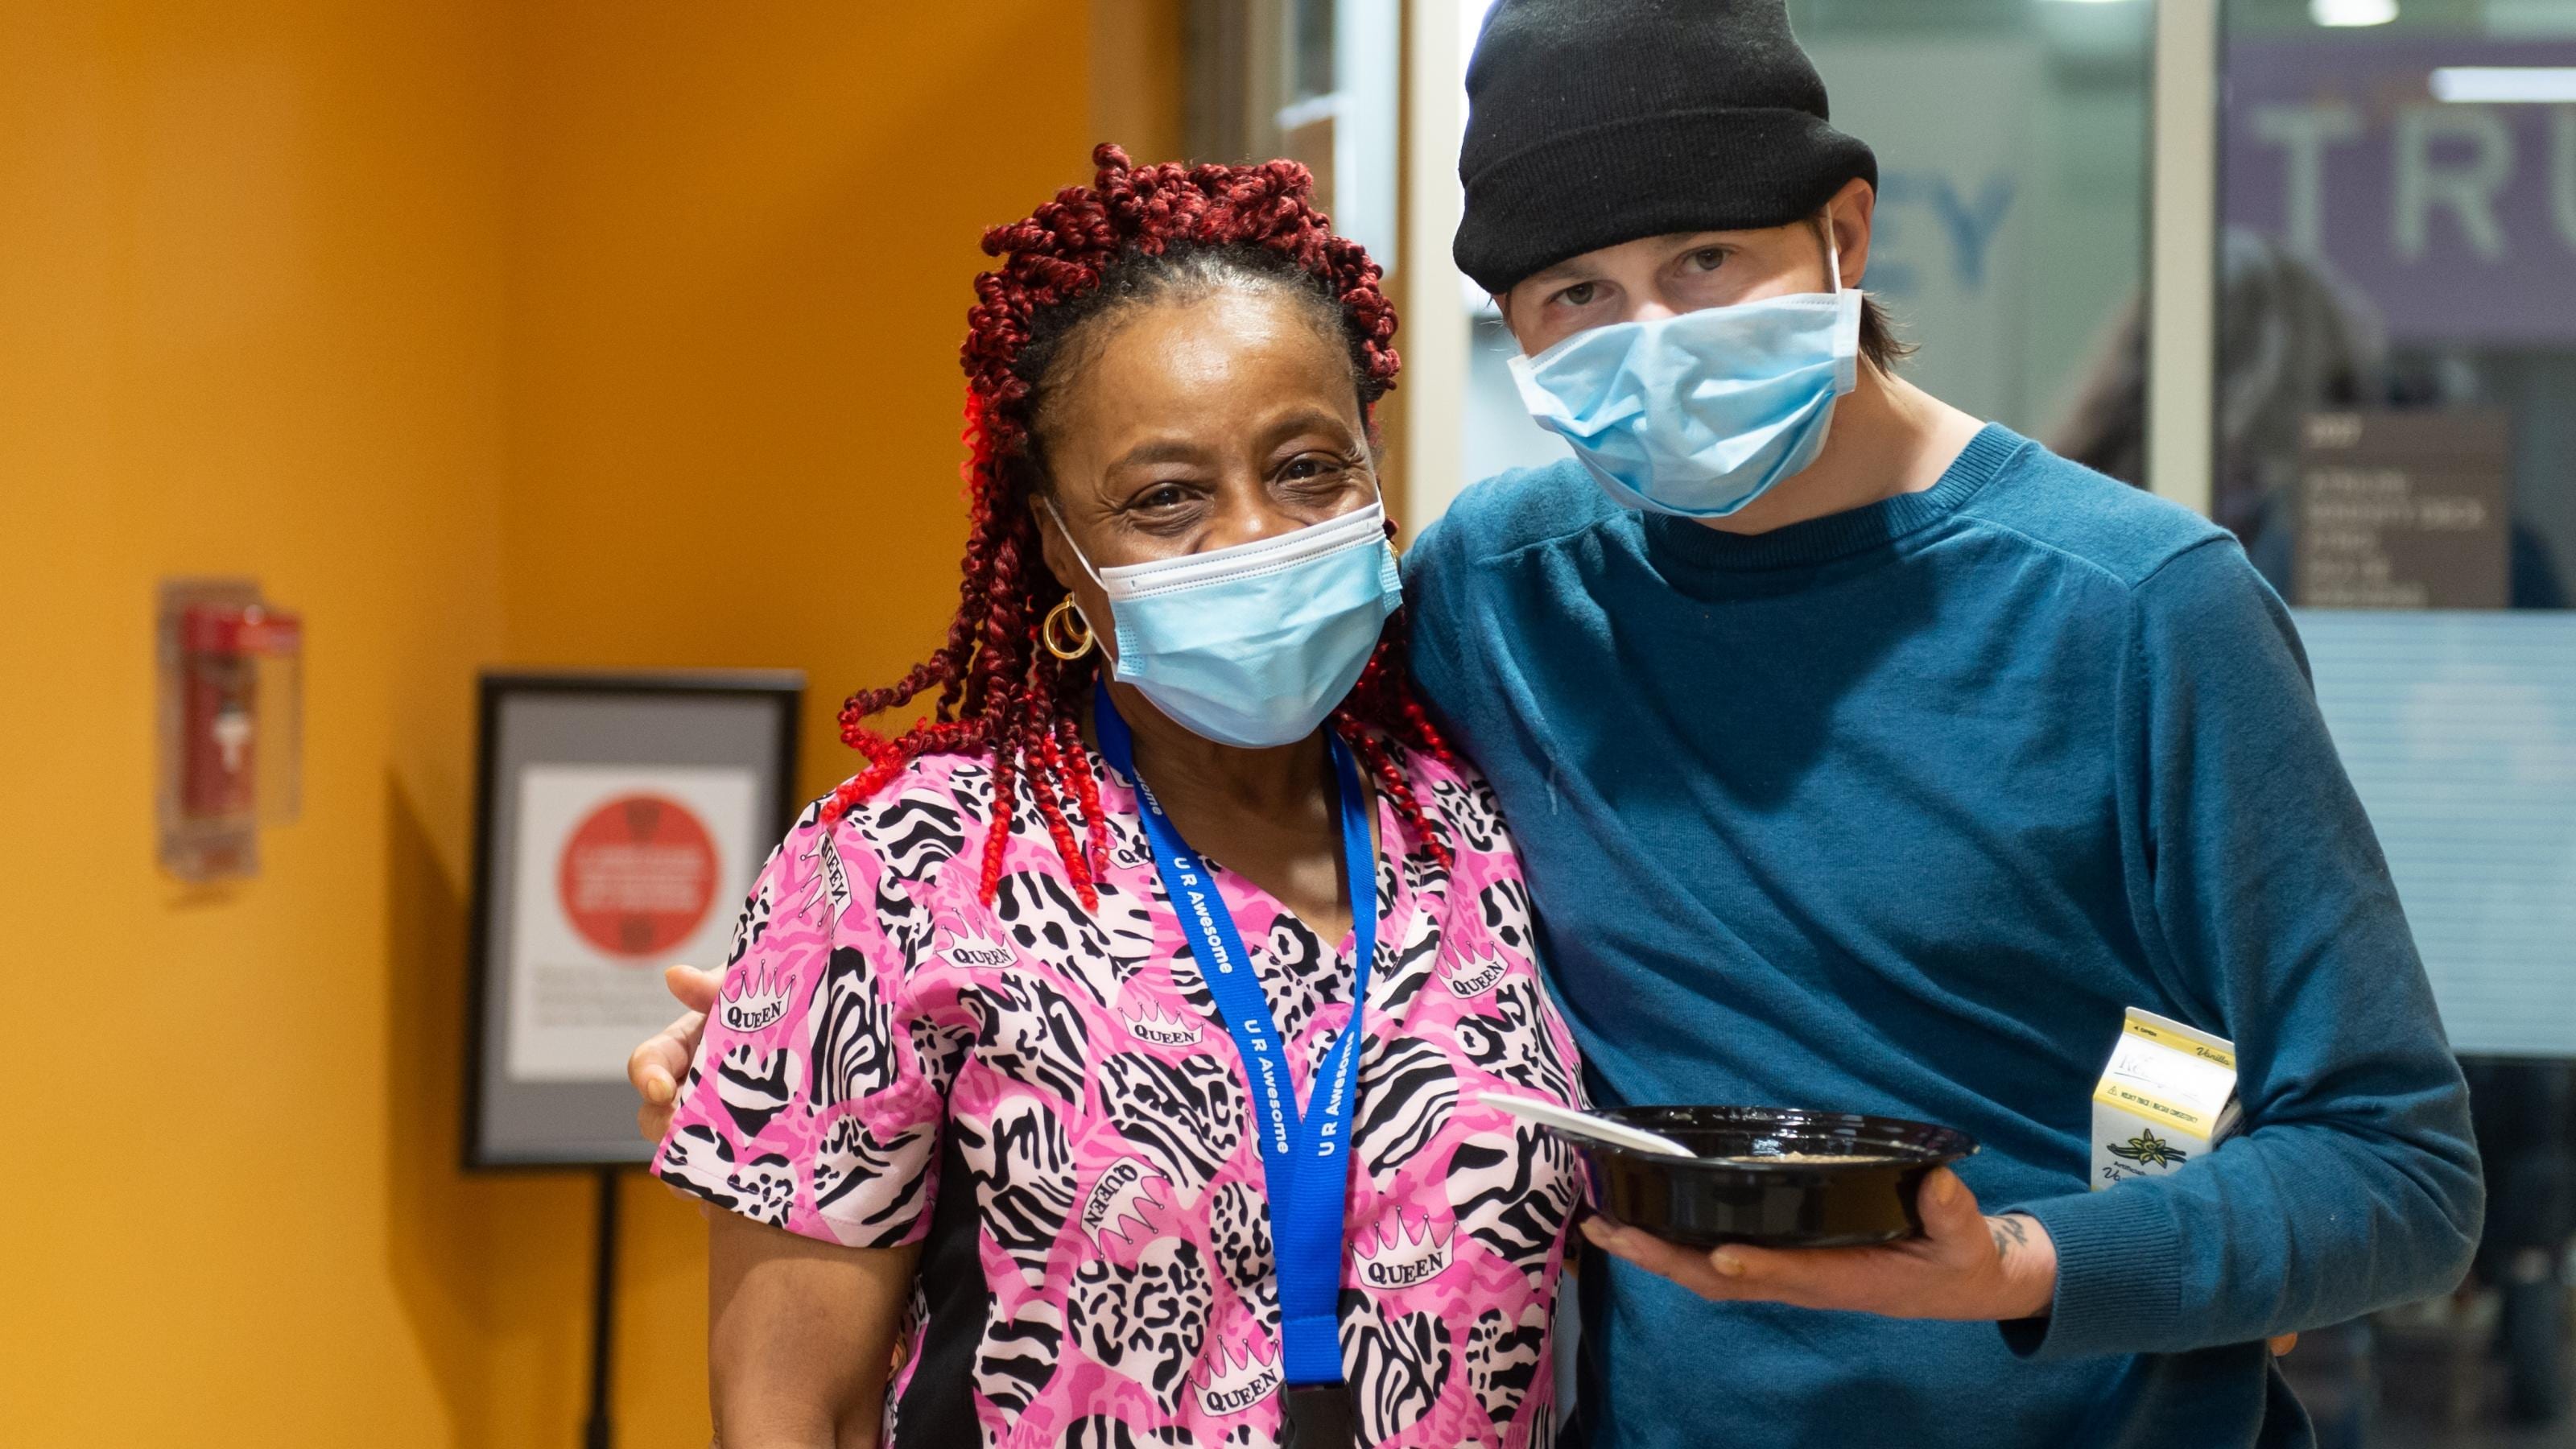 (slide 1 of 6) Two individuals at Boston Healthcare for the Homeless embracing and smiling to camera - wearing face masks. 